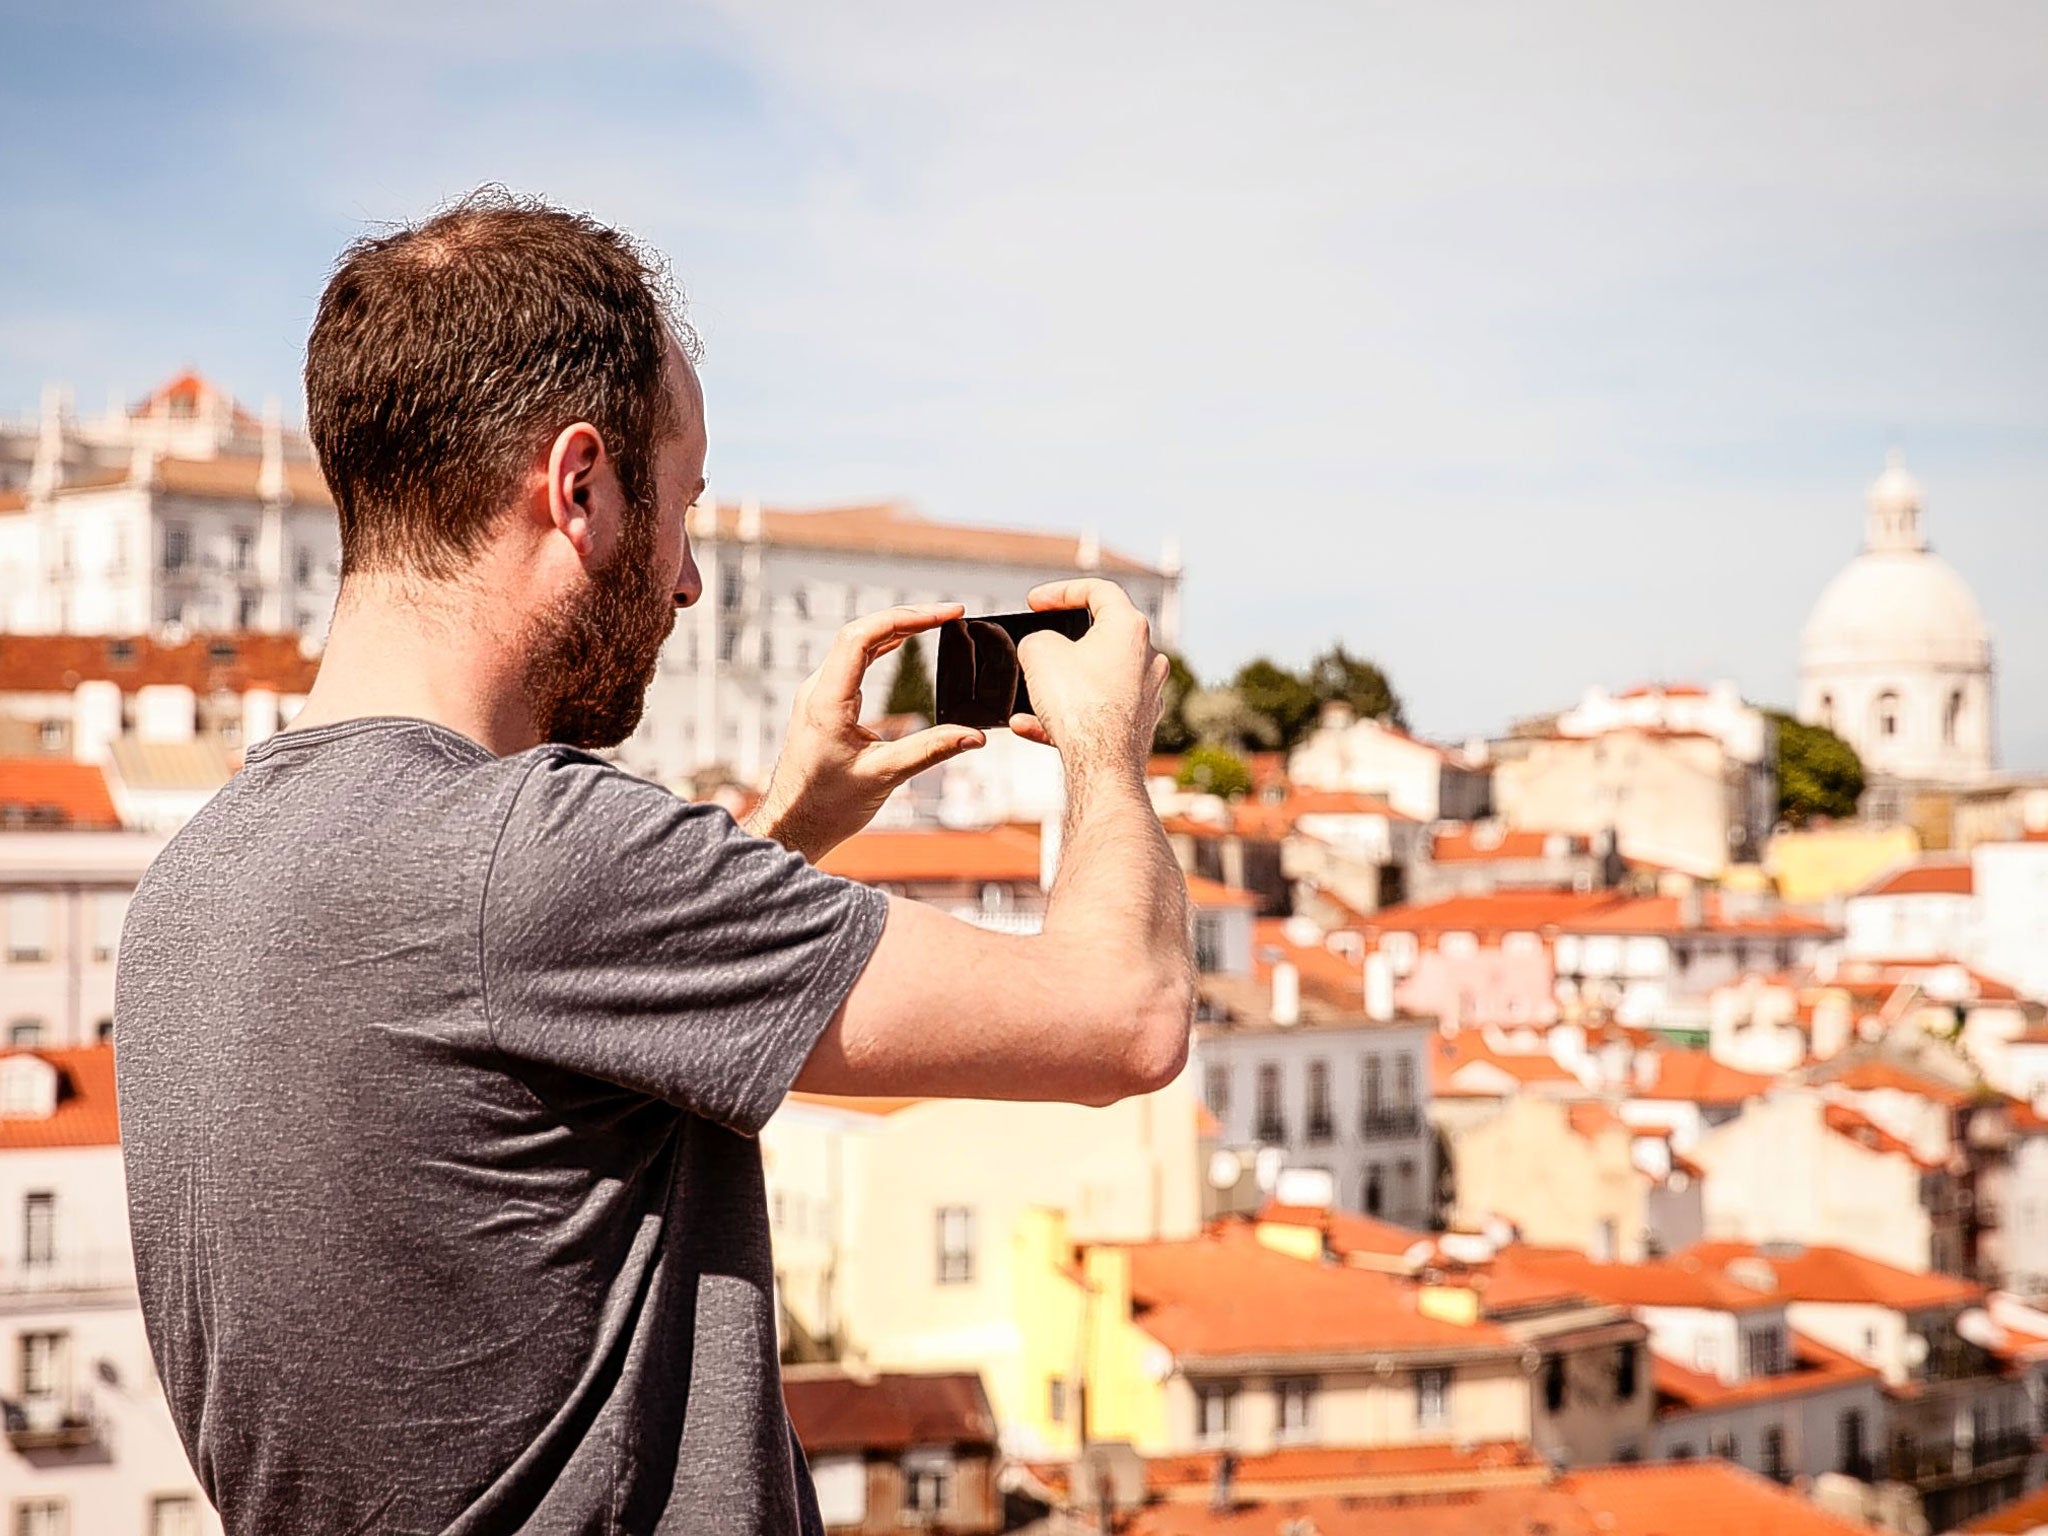 Street view: Simon takes a snap of the Lisbon skyline with a Nexus 5 smartphone